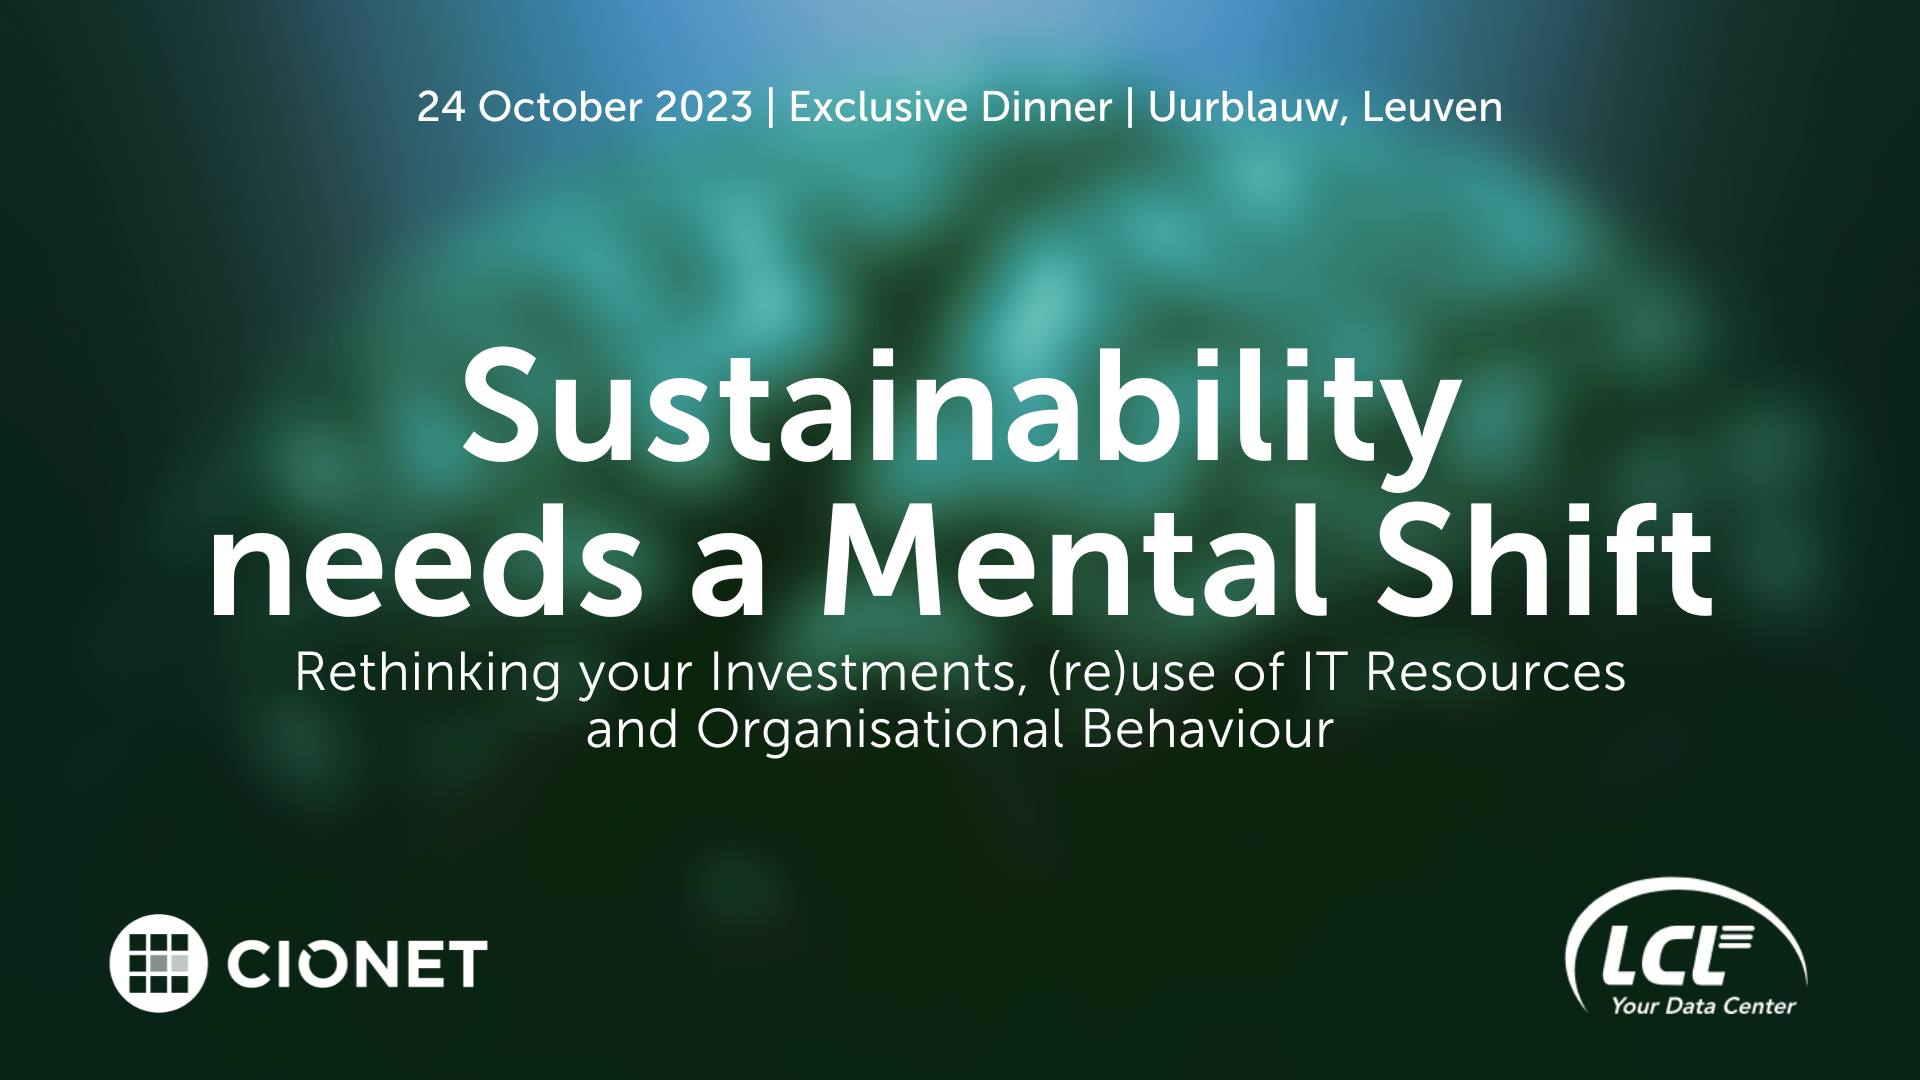 BE20231024 - LCL - Sustainability is a Mental Shift (5)